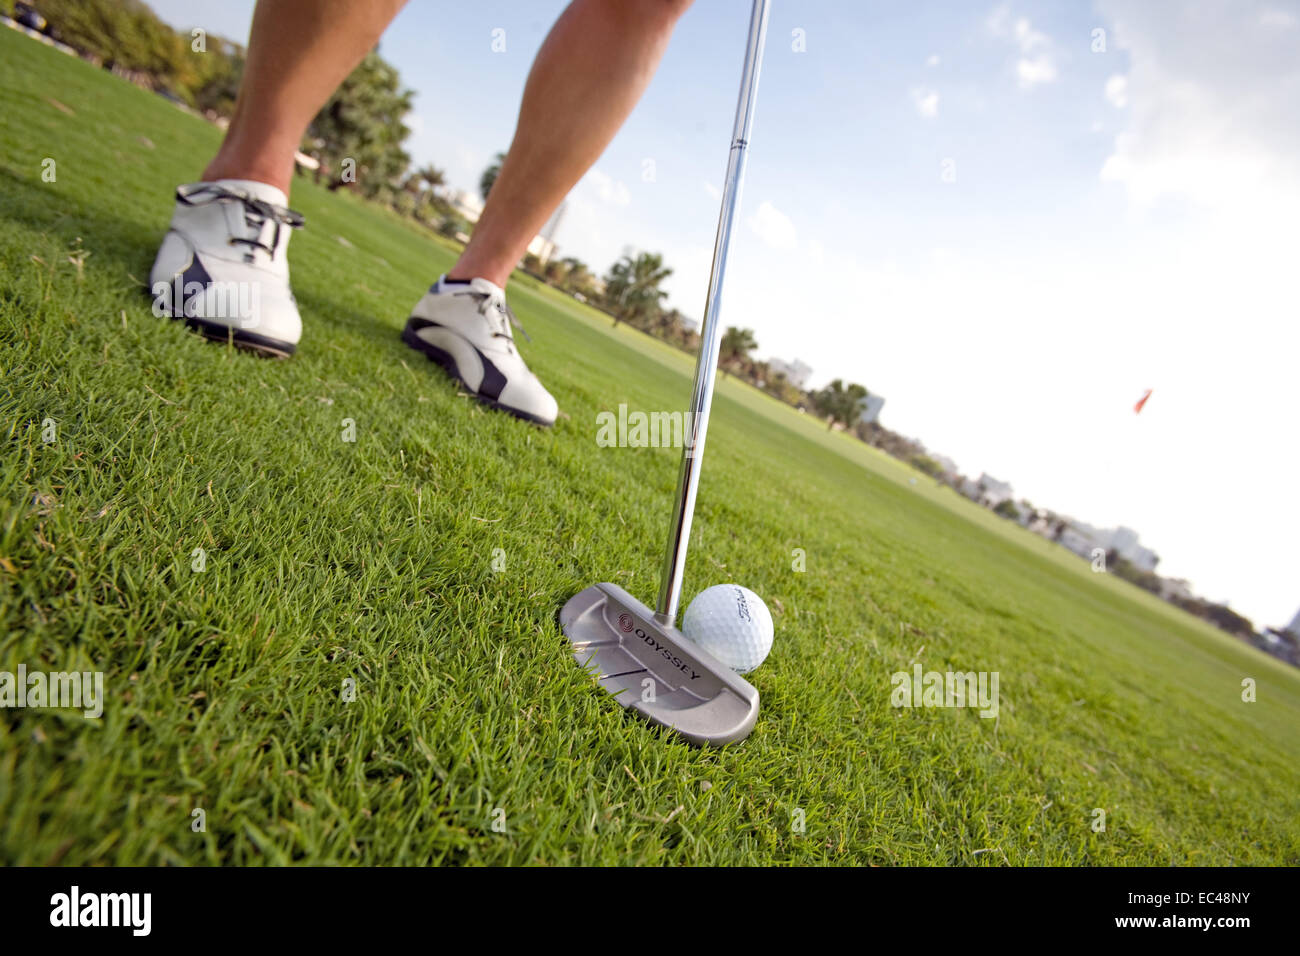 Page 2 - Golf Club High Resolution Stock Photography and Images - Alamy